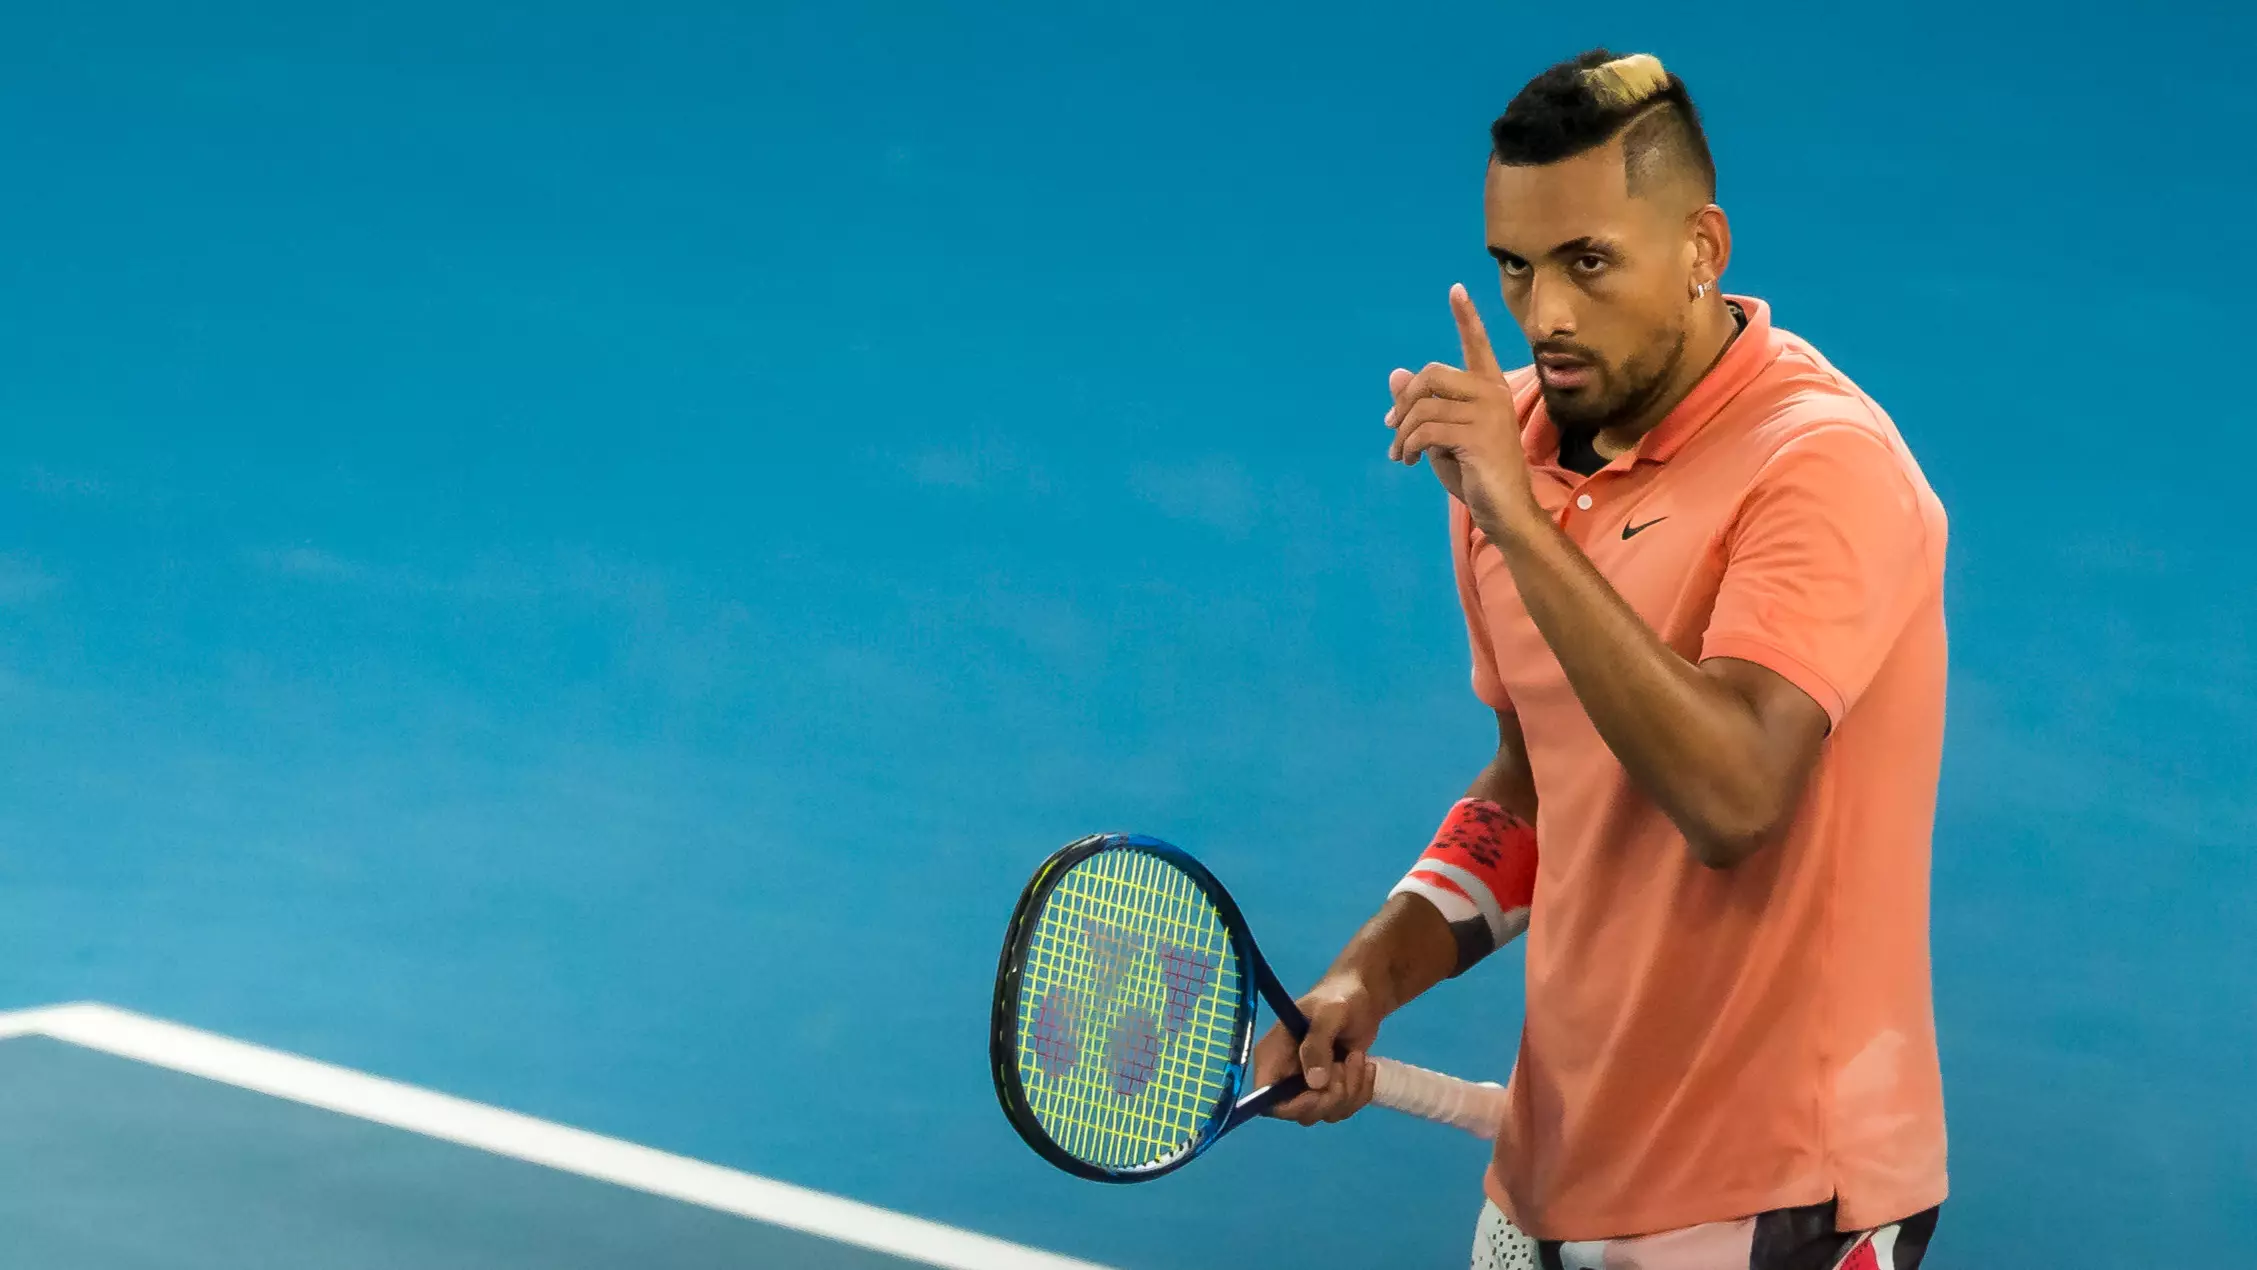 'Do you have rocks in your head?': Nick Kyrgios' Savage Response To Tennis Rival